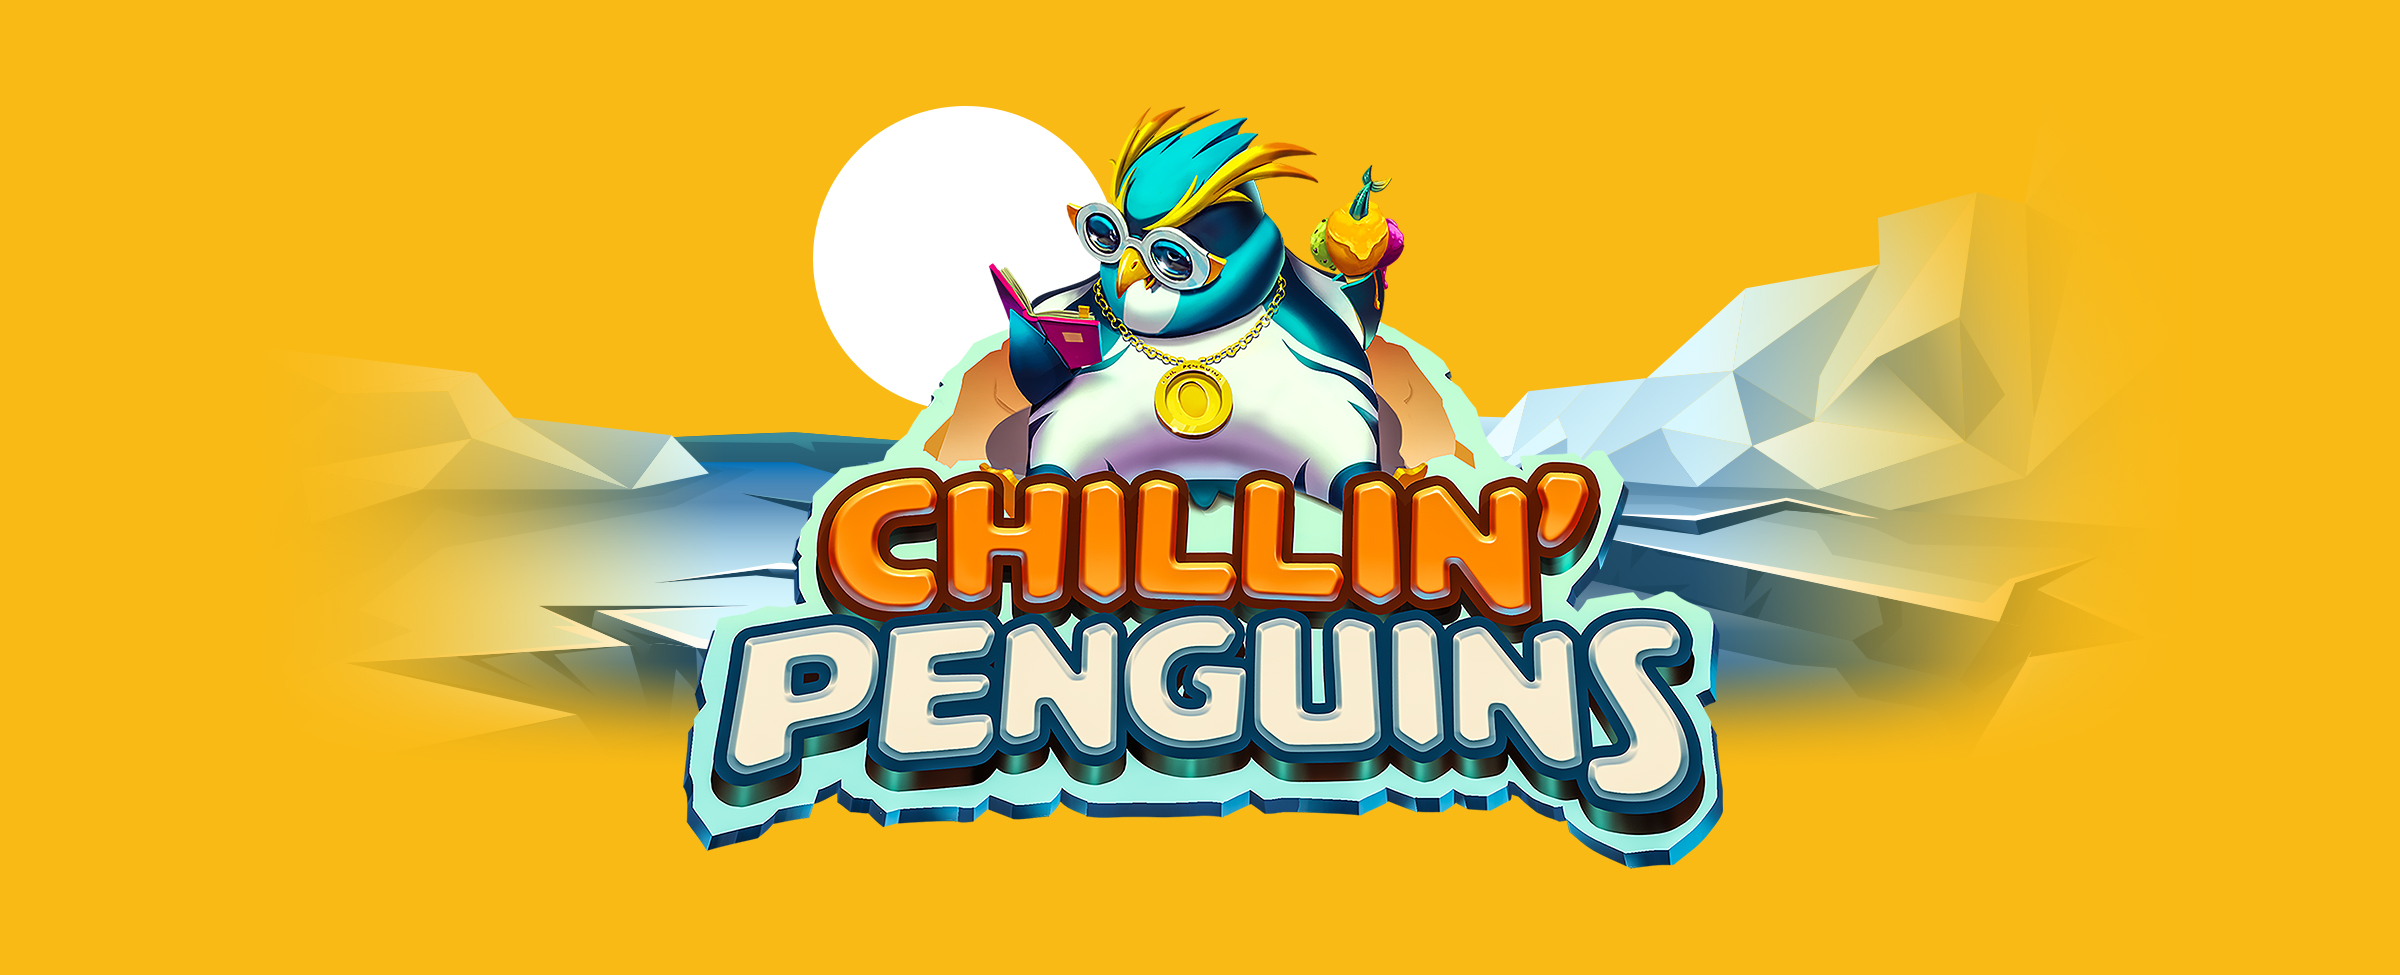 There’s nothing better than a good chillax. When you have some down-time, give Chillin' Penguins a go. Relax and take it easy with this gem. 